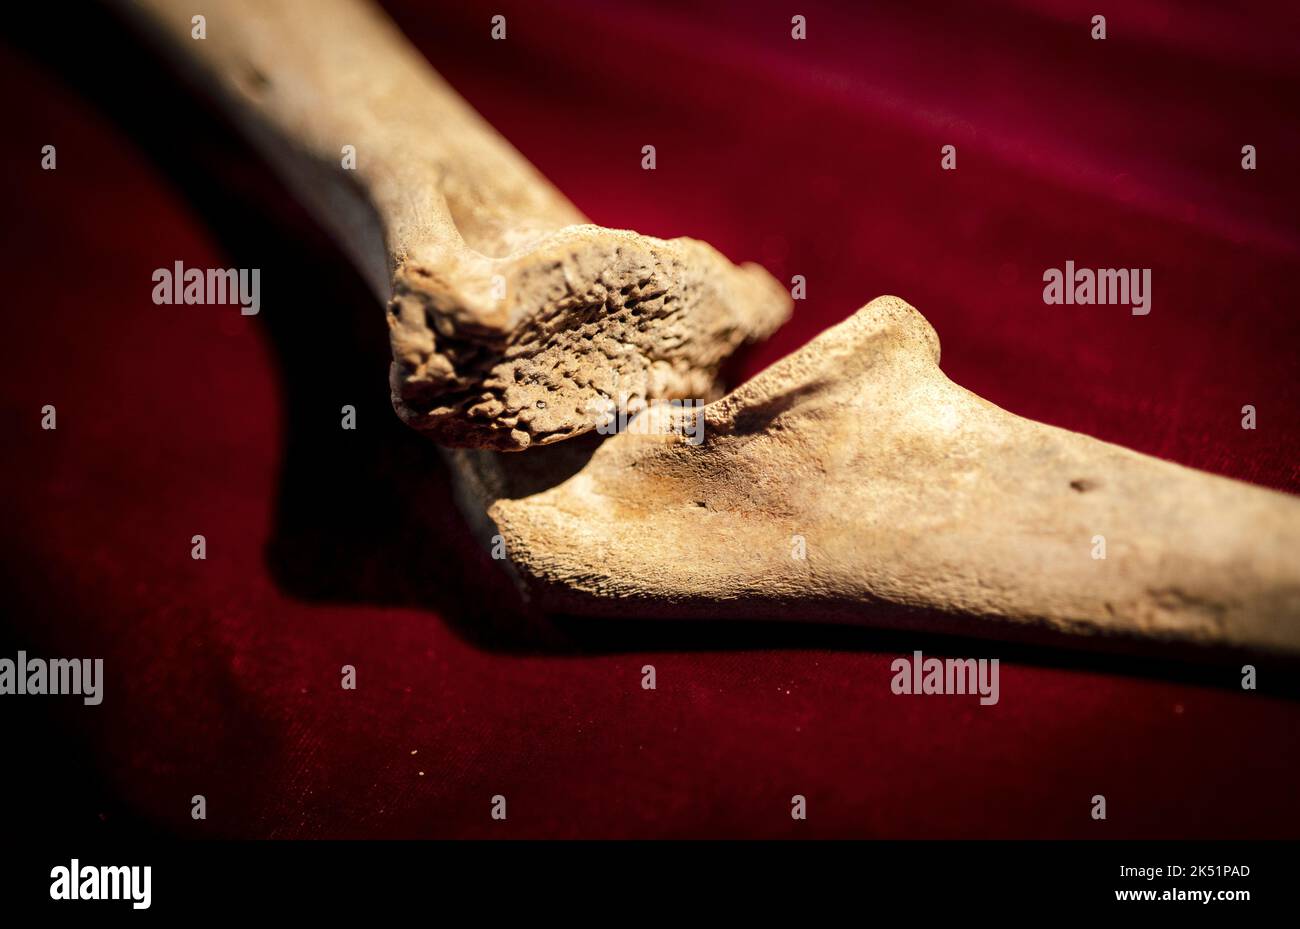 2022-10-05 13:14:56 THE HAGUE - Two lion bones found during an excavation at the Buitenhof. After the discovery in 2021, historical research has been done that shows that it is a front leg of a young lion. Between 1344 and 1358 lions were kept on the Buitenhof. ANP RAMON VAN FLYMEN netherlands out - belgium out Stock Photo